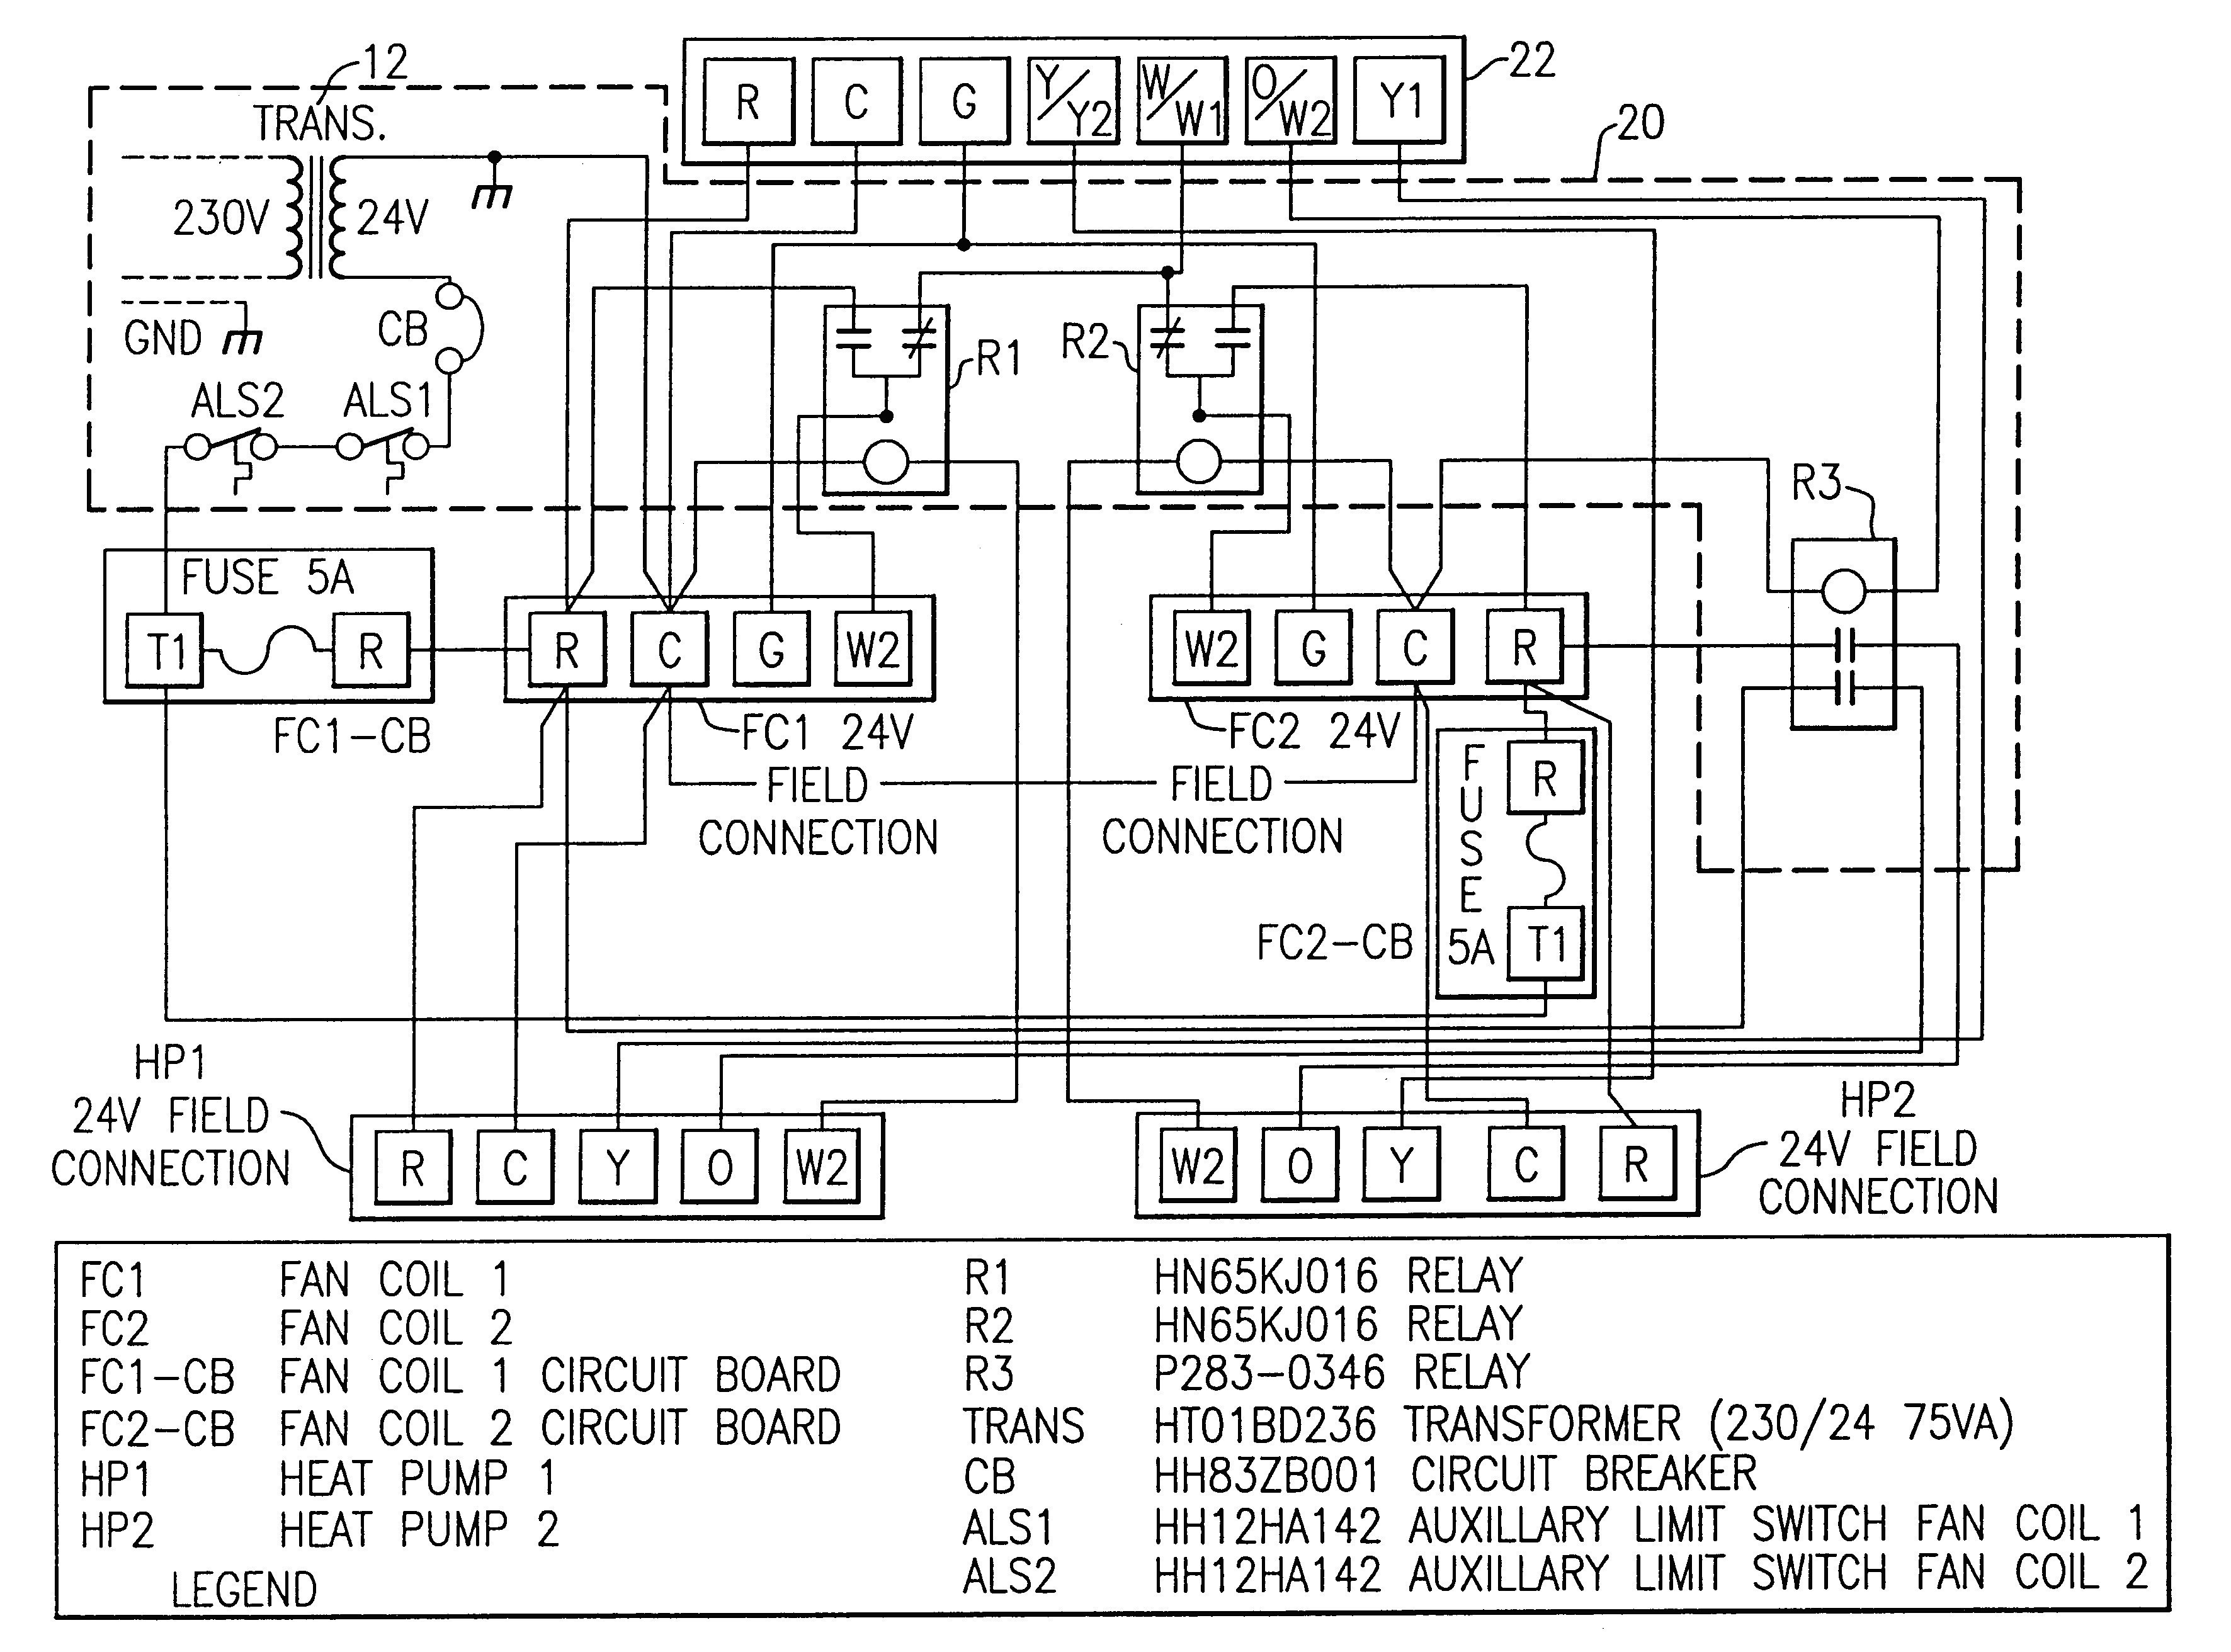 Intertherm Thermostat Wiring Diagram Unique Wiring Diagram For Changeover Relay New Heat Pump Wiring Diagram New